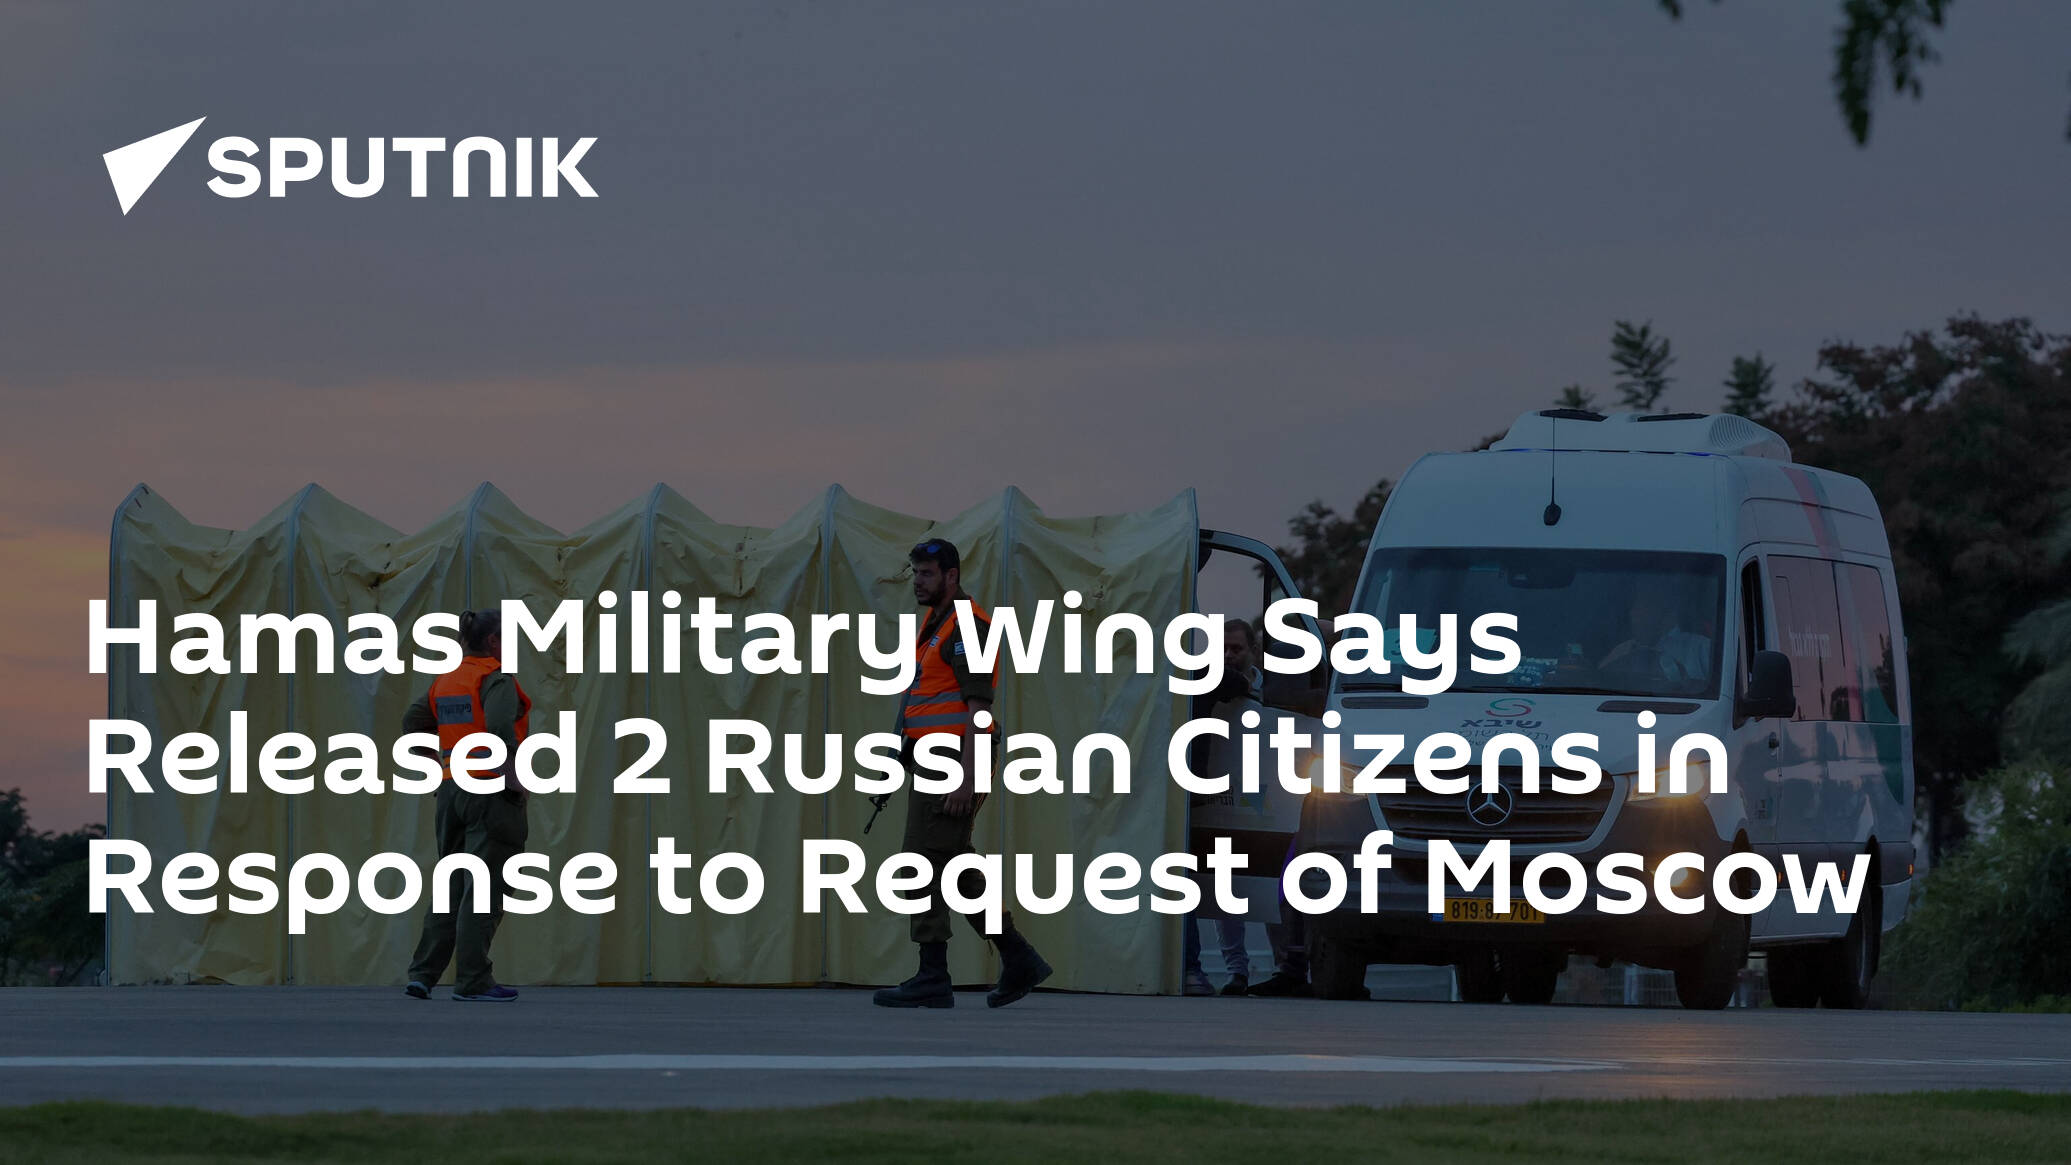 Hamas Military Wing Says Released 2 Russian Citizens in Response to Request of Moscow